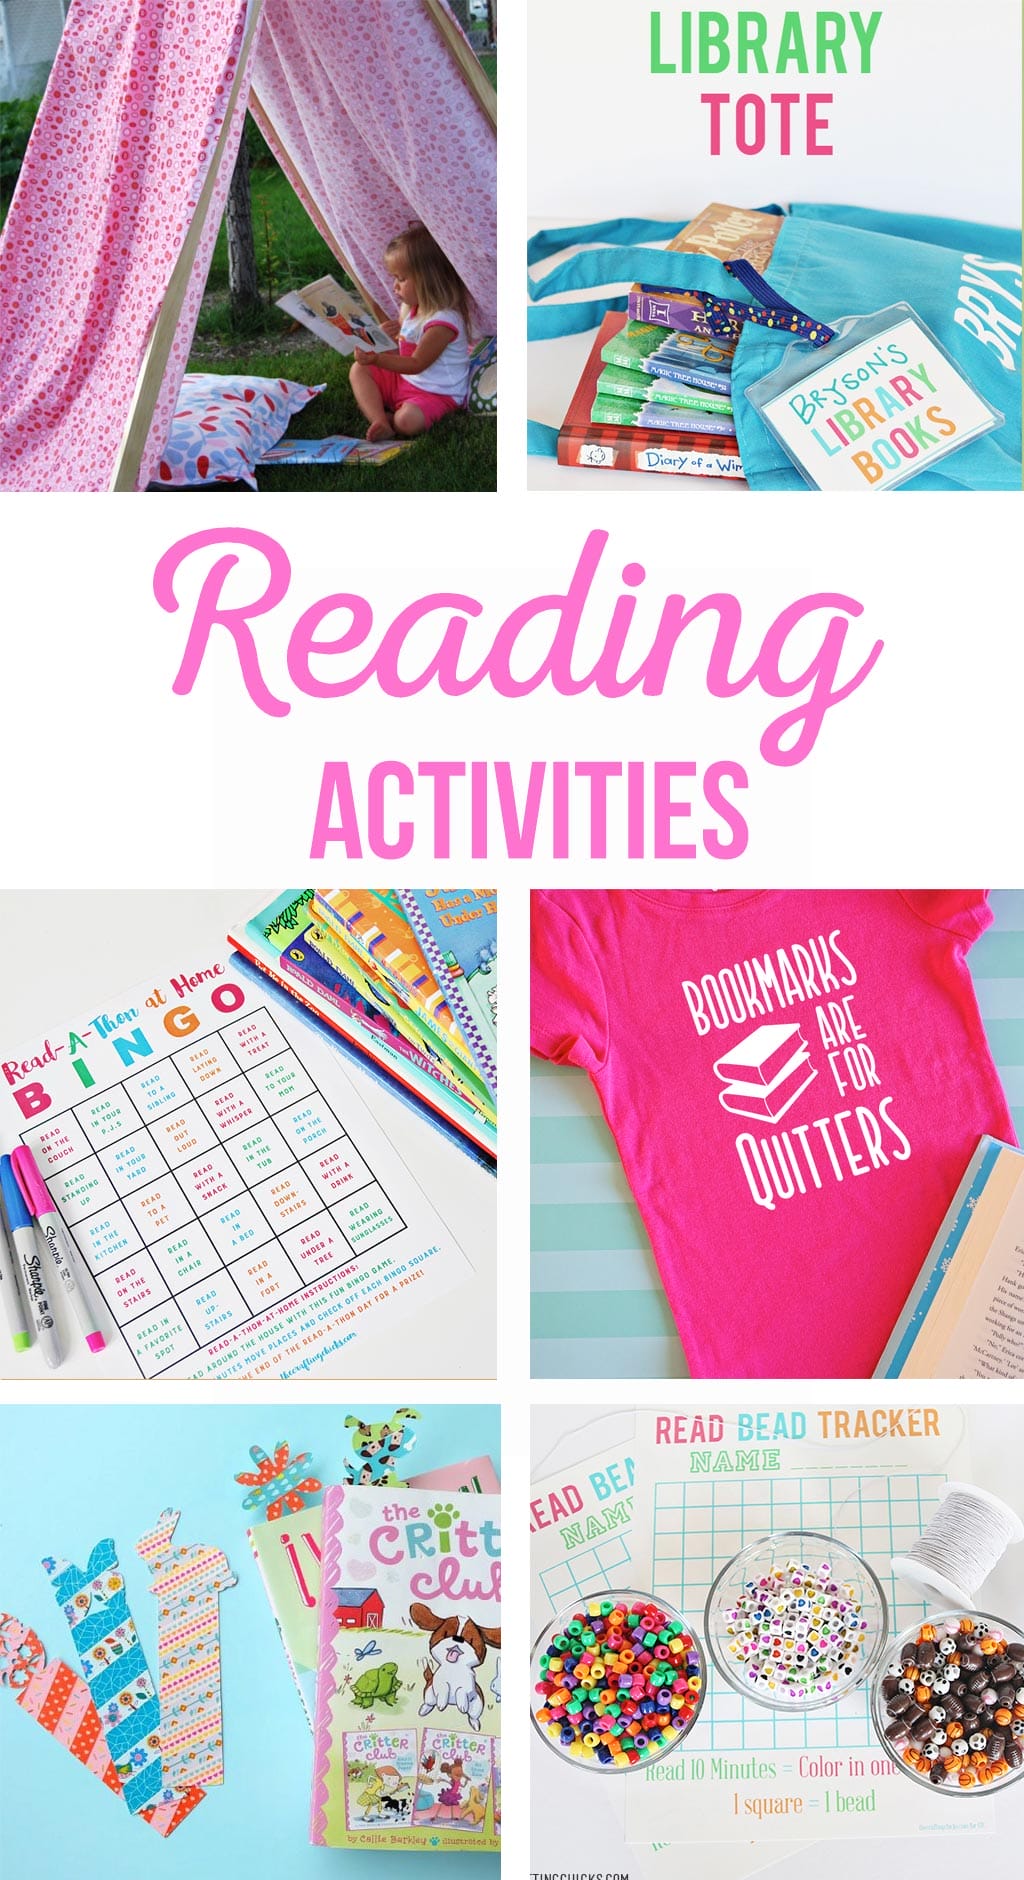 Fun with Reading | Activities to keep your kids excited about reading this summer! Printable Reading Bingo, reading snack and DIY book lovers T-shirts.